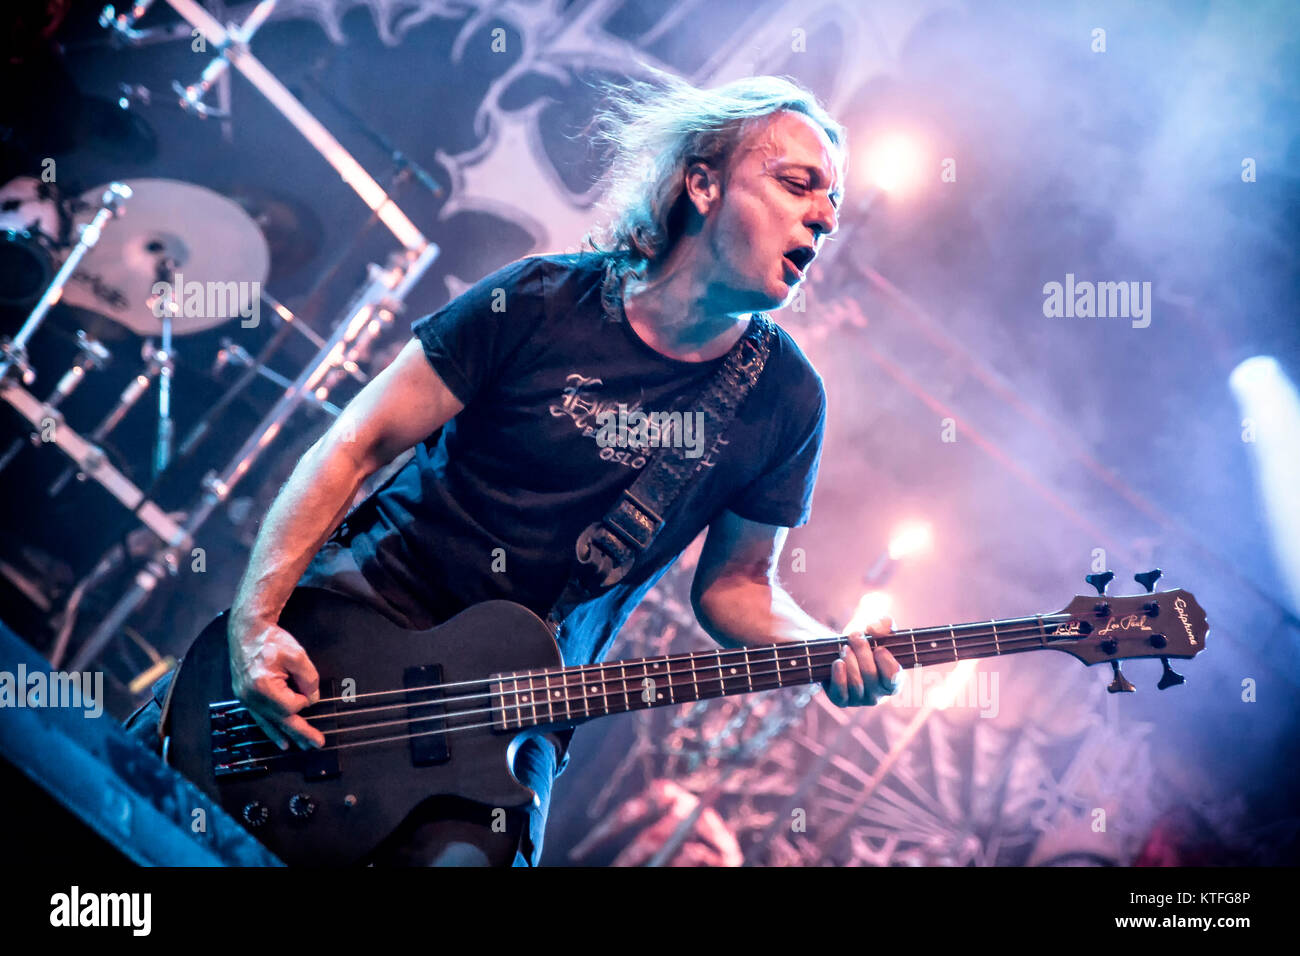 The Norwegian black metal band Mayhem performs a live concert at the Norwegian music festival Øyafestivalen 2014. Here bass player Necrobutcher is seen live on stage. Norway, 08/08 2014. Stock Photo